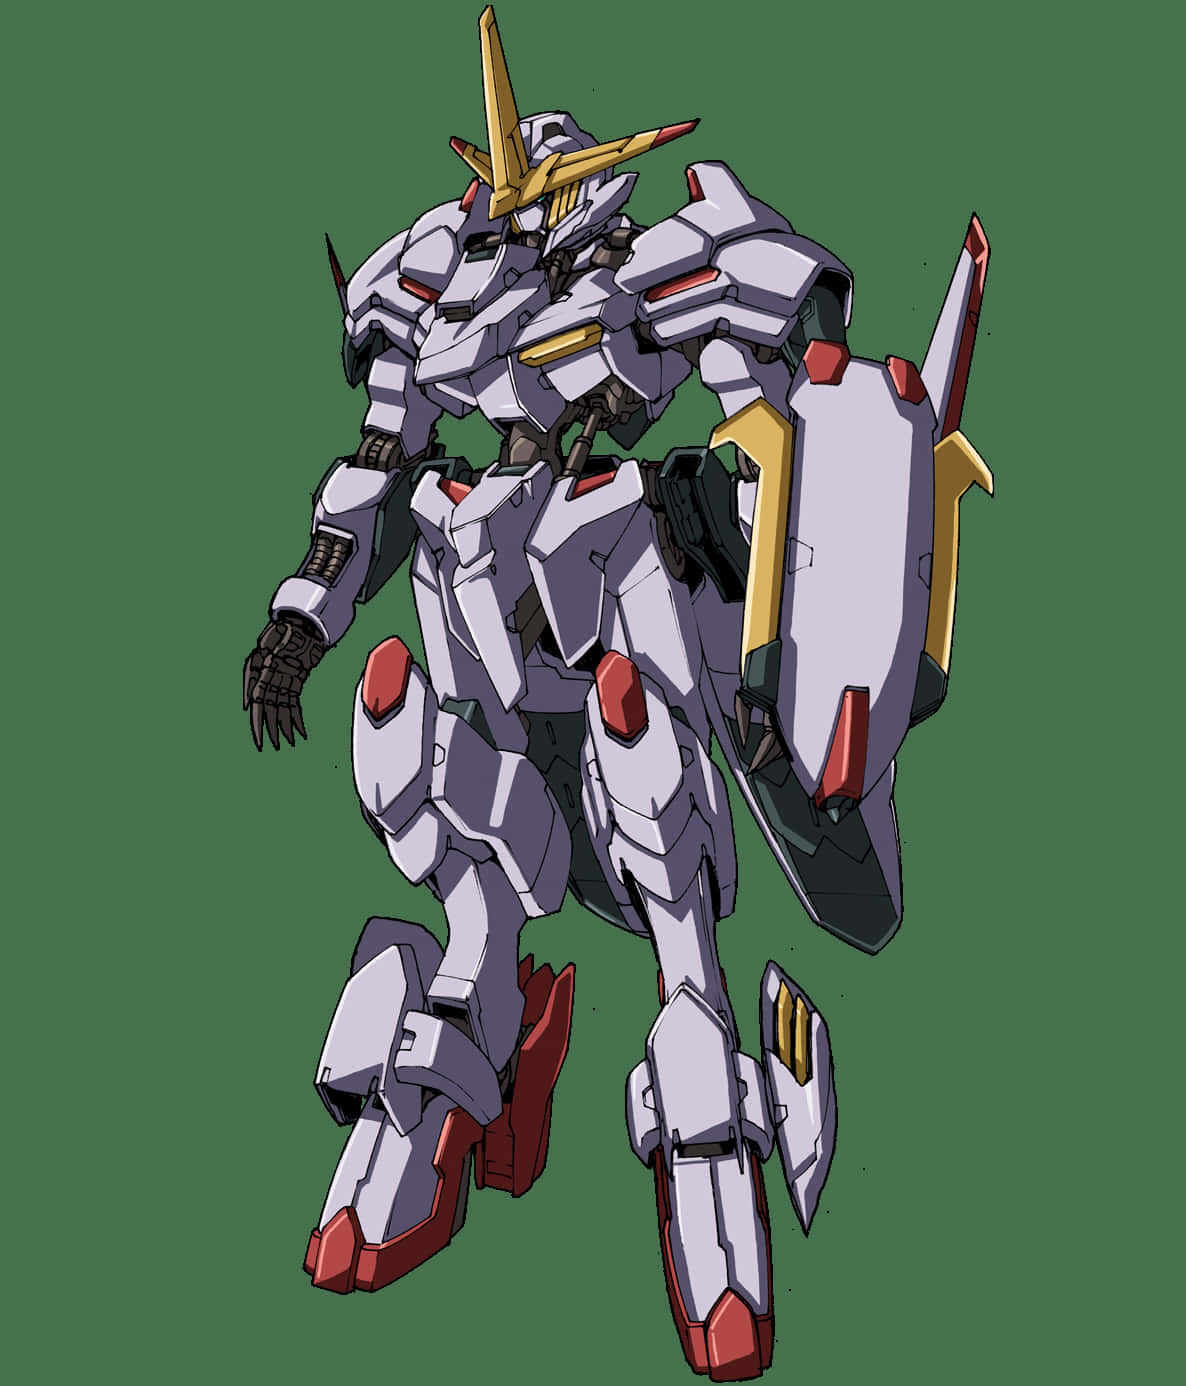 "A New Hope - Mobile Suit Gundam Iron-Blooded Orphans" Wallpaper